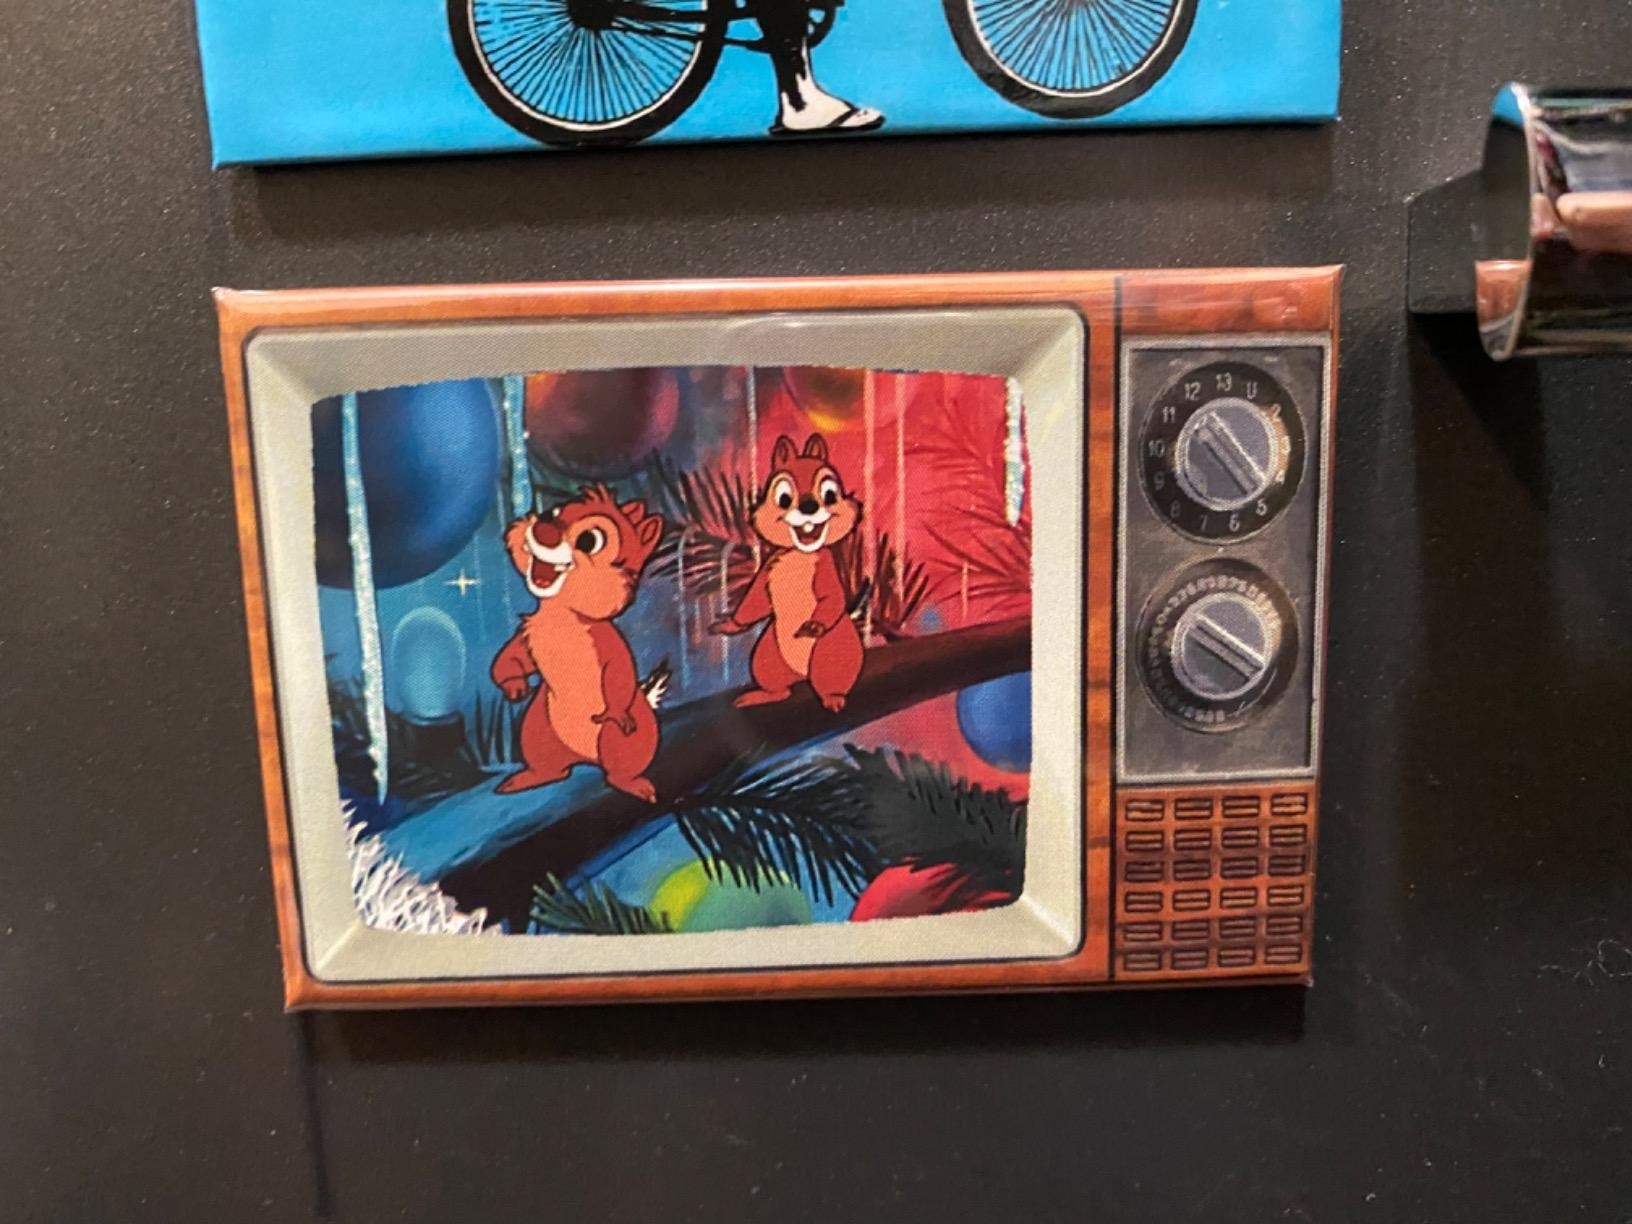 the magnet that looks like an old tv with chip and dale on the screen